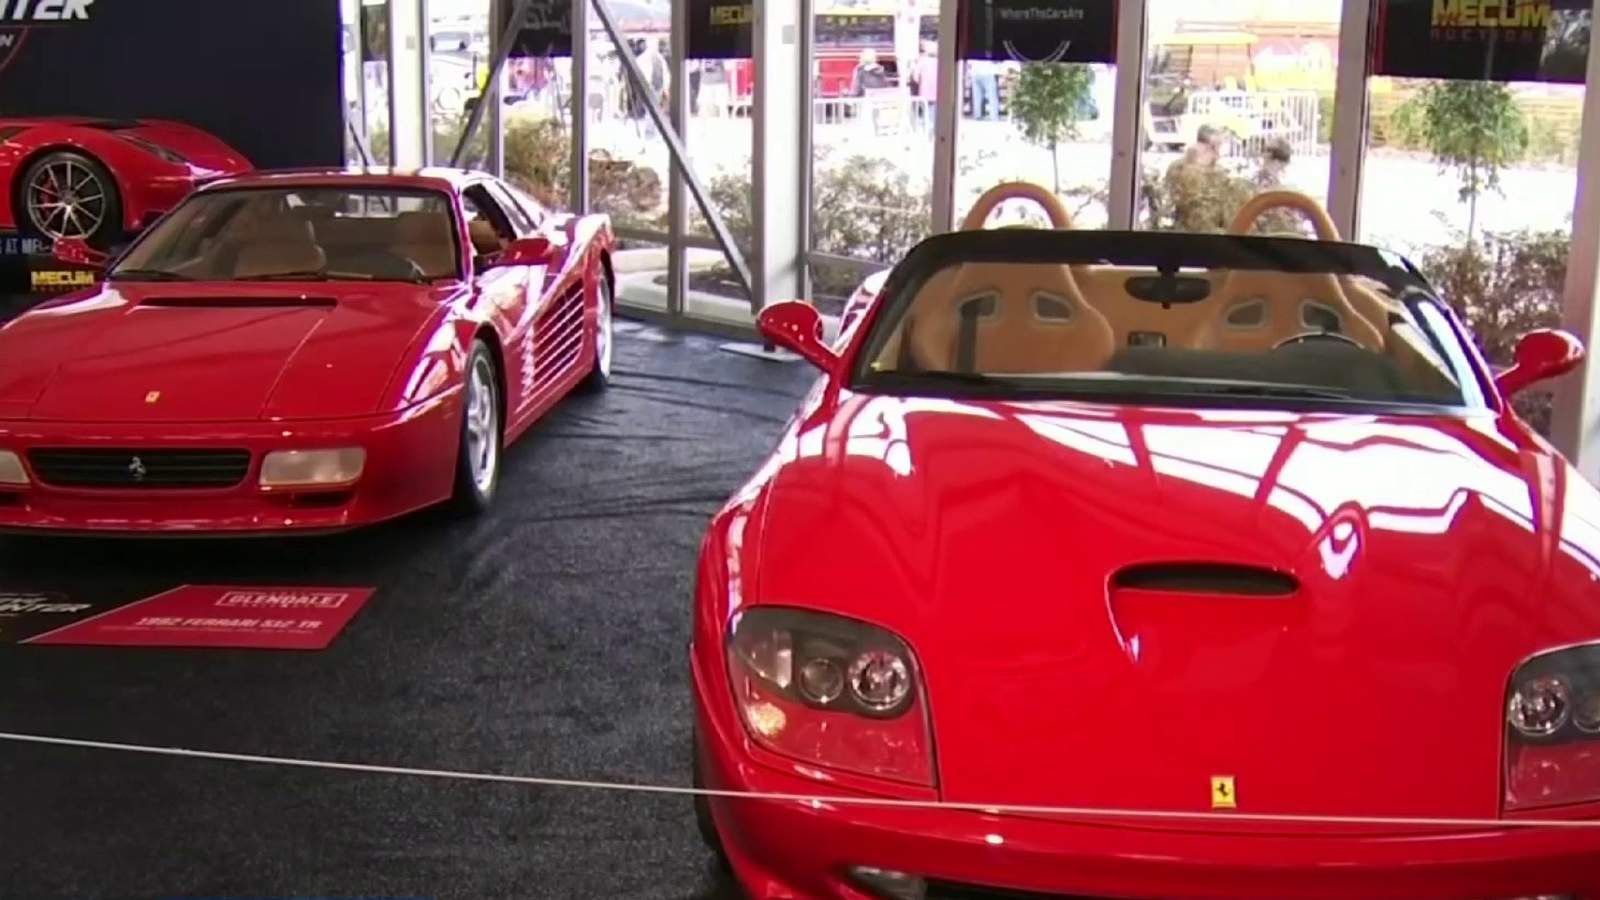 World’s largest car auction returns to Kissimmee with new safety measures